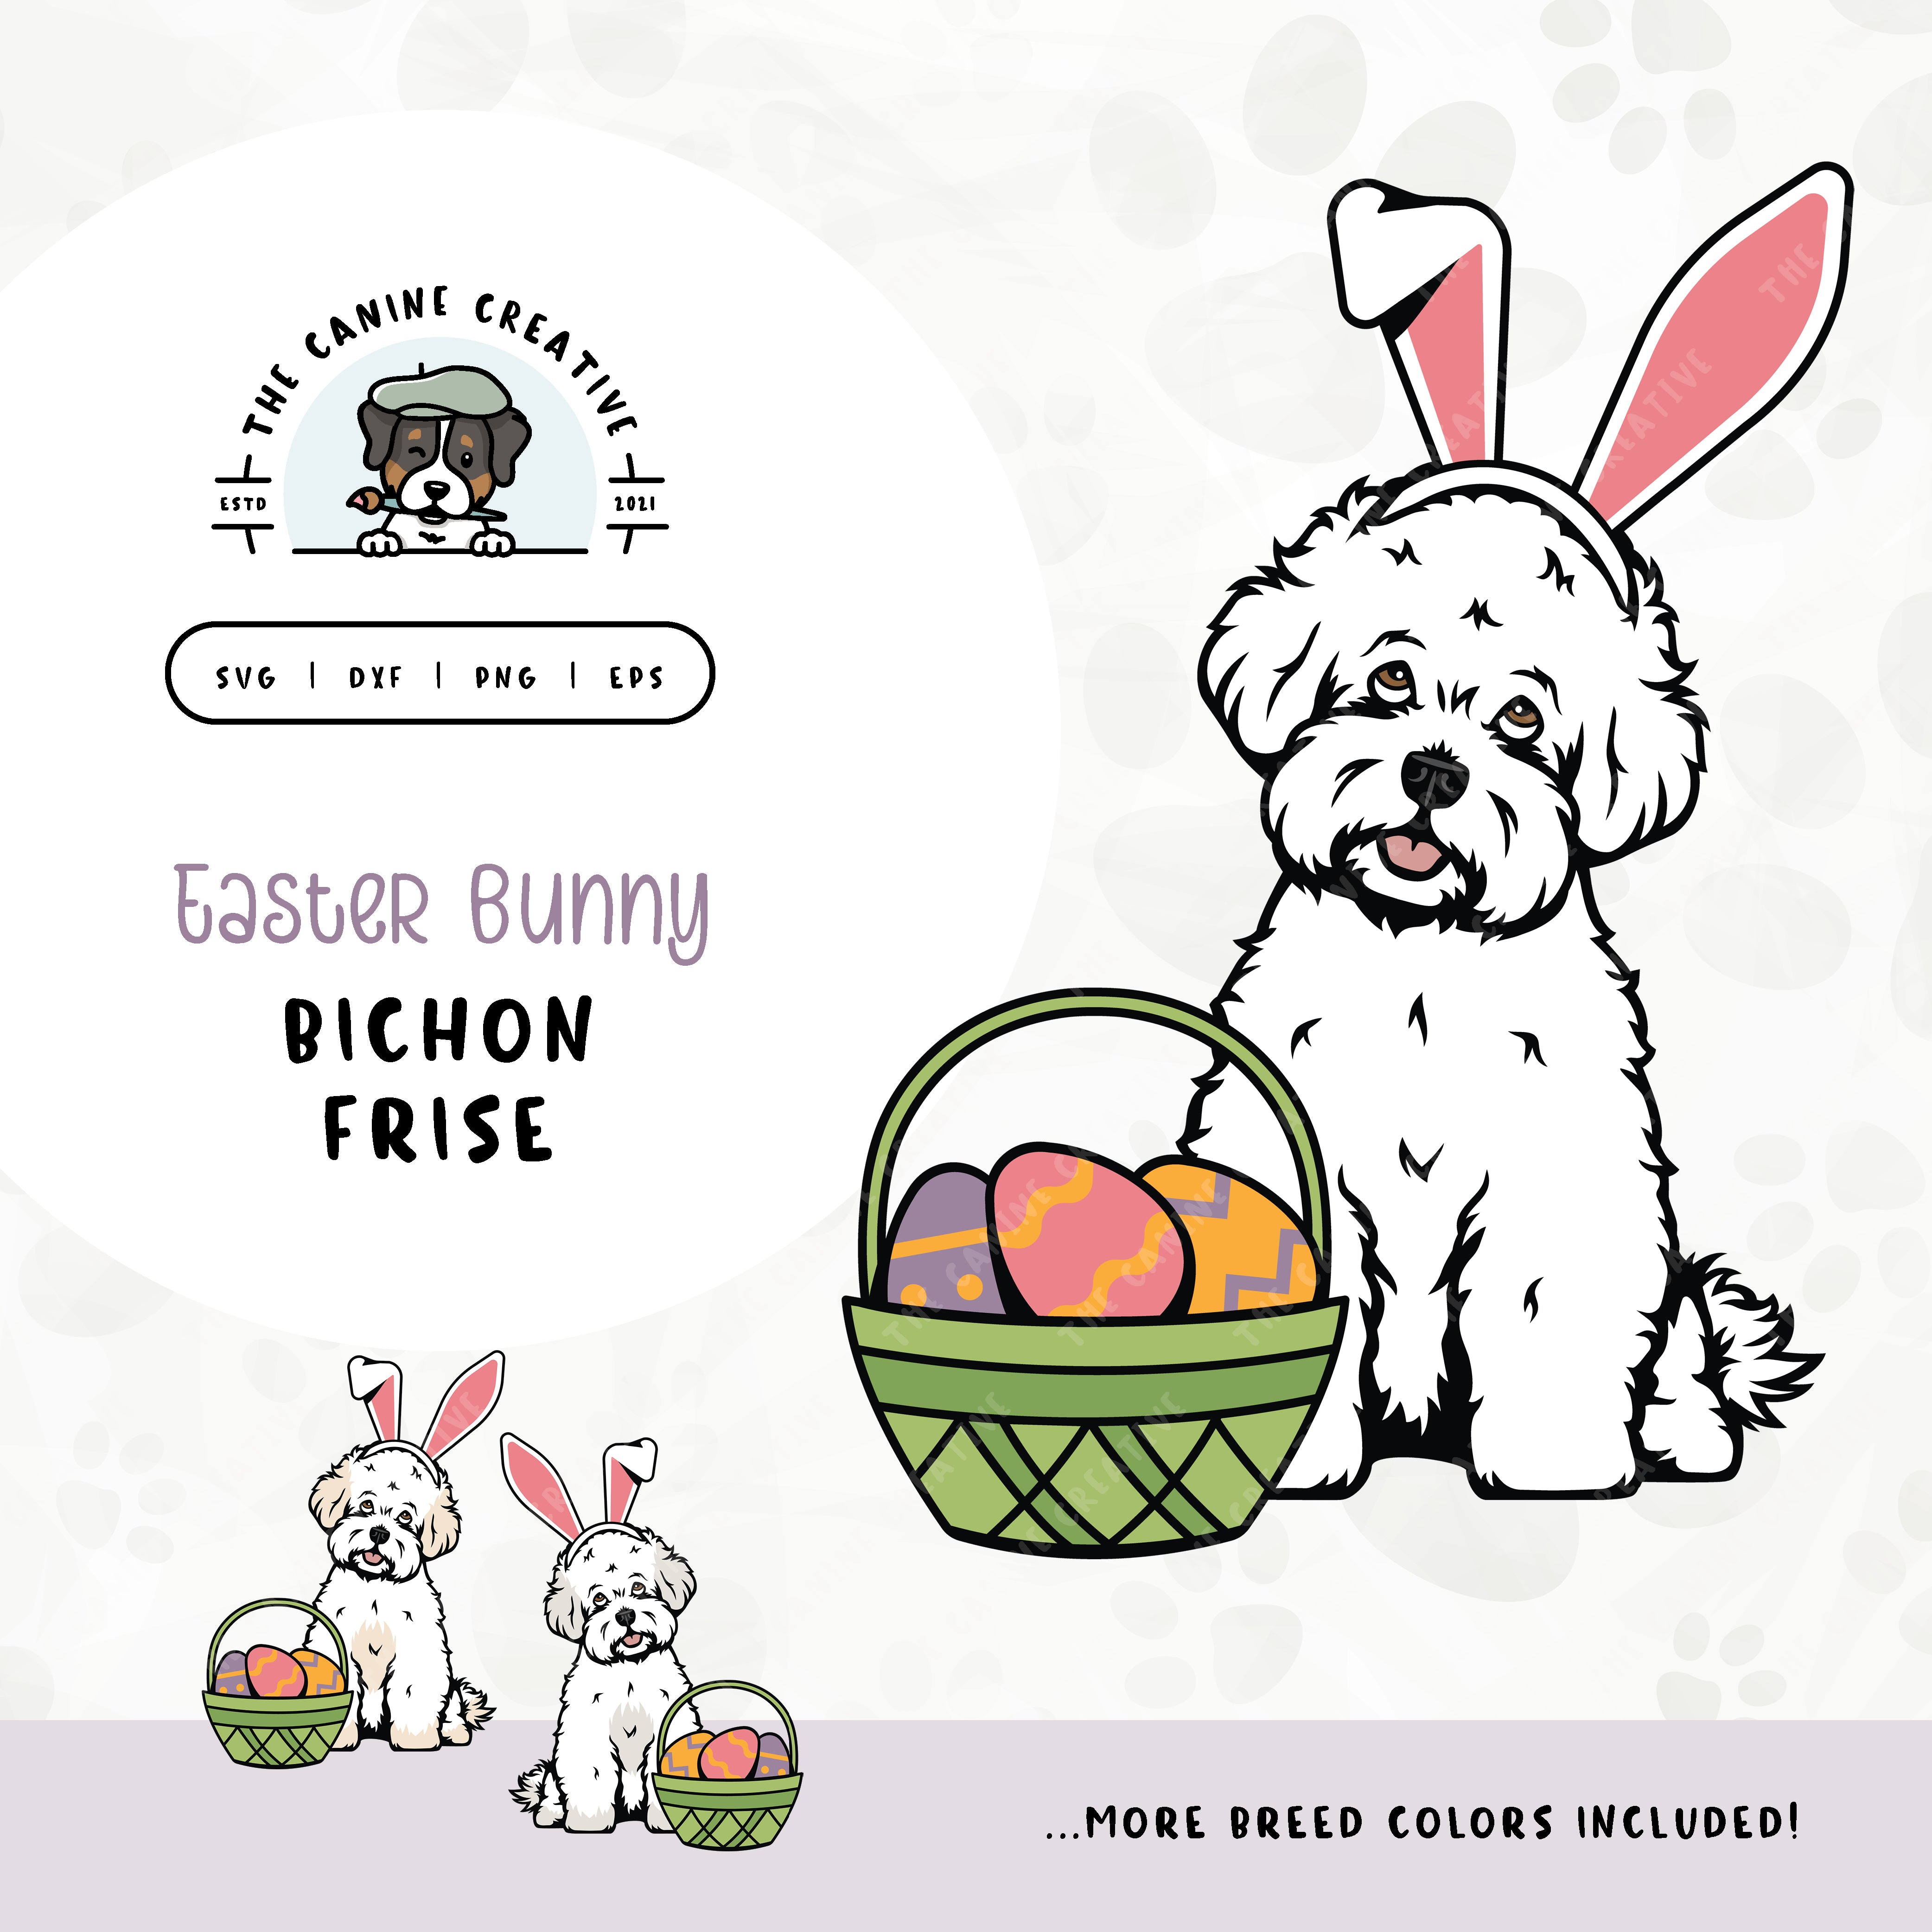 This springtime illustration features a Bichon Frise adorned with festive bunny ears sitting next to a basket of brightly-colored Easter eggs. File formats include: SVG, DXF, PNG, and EPS.